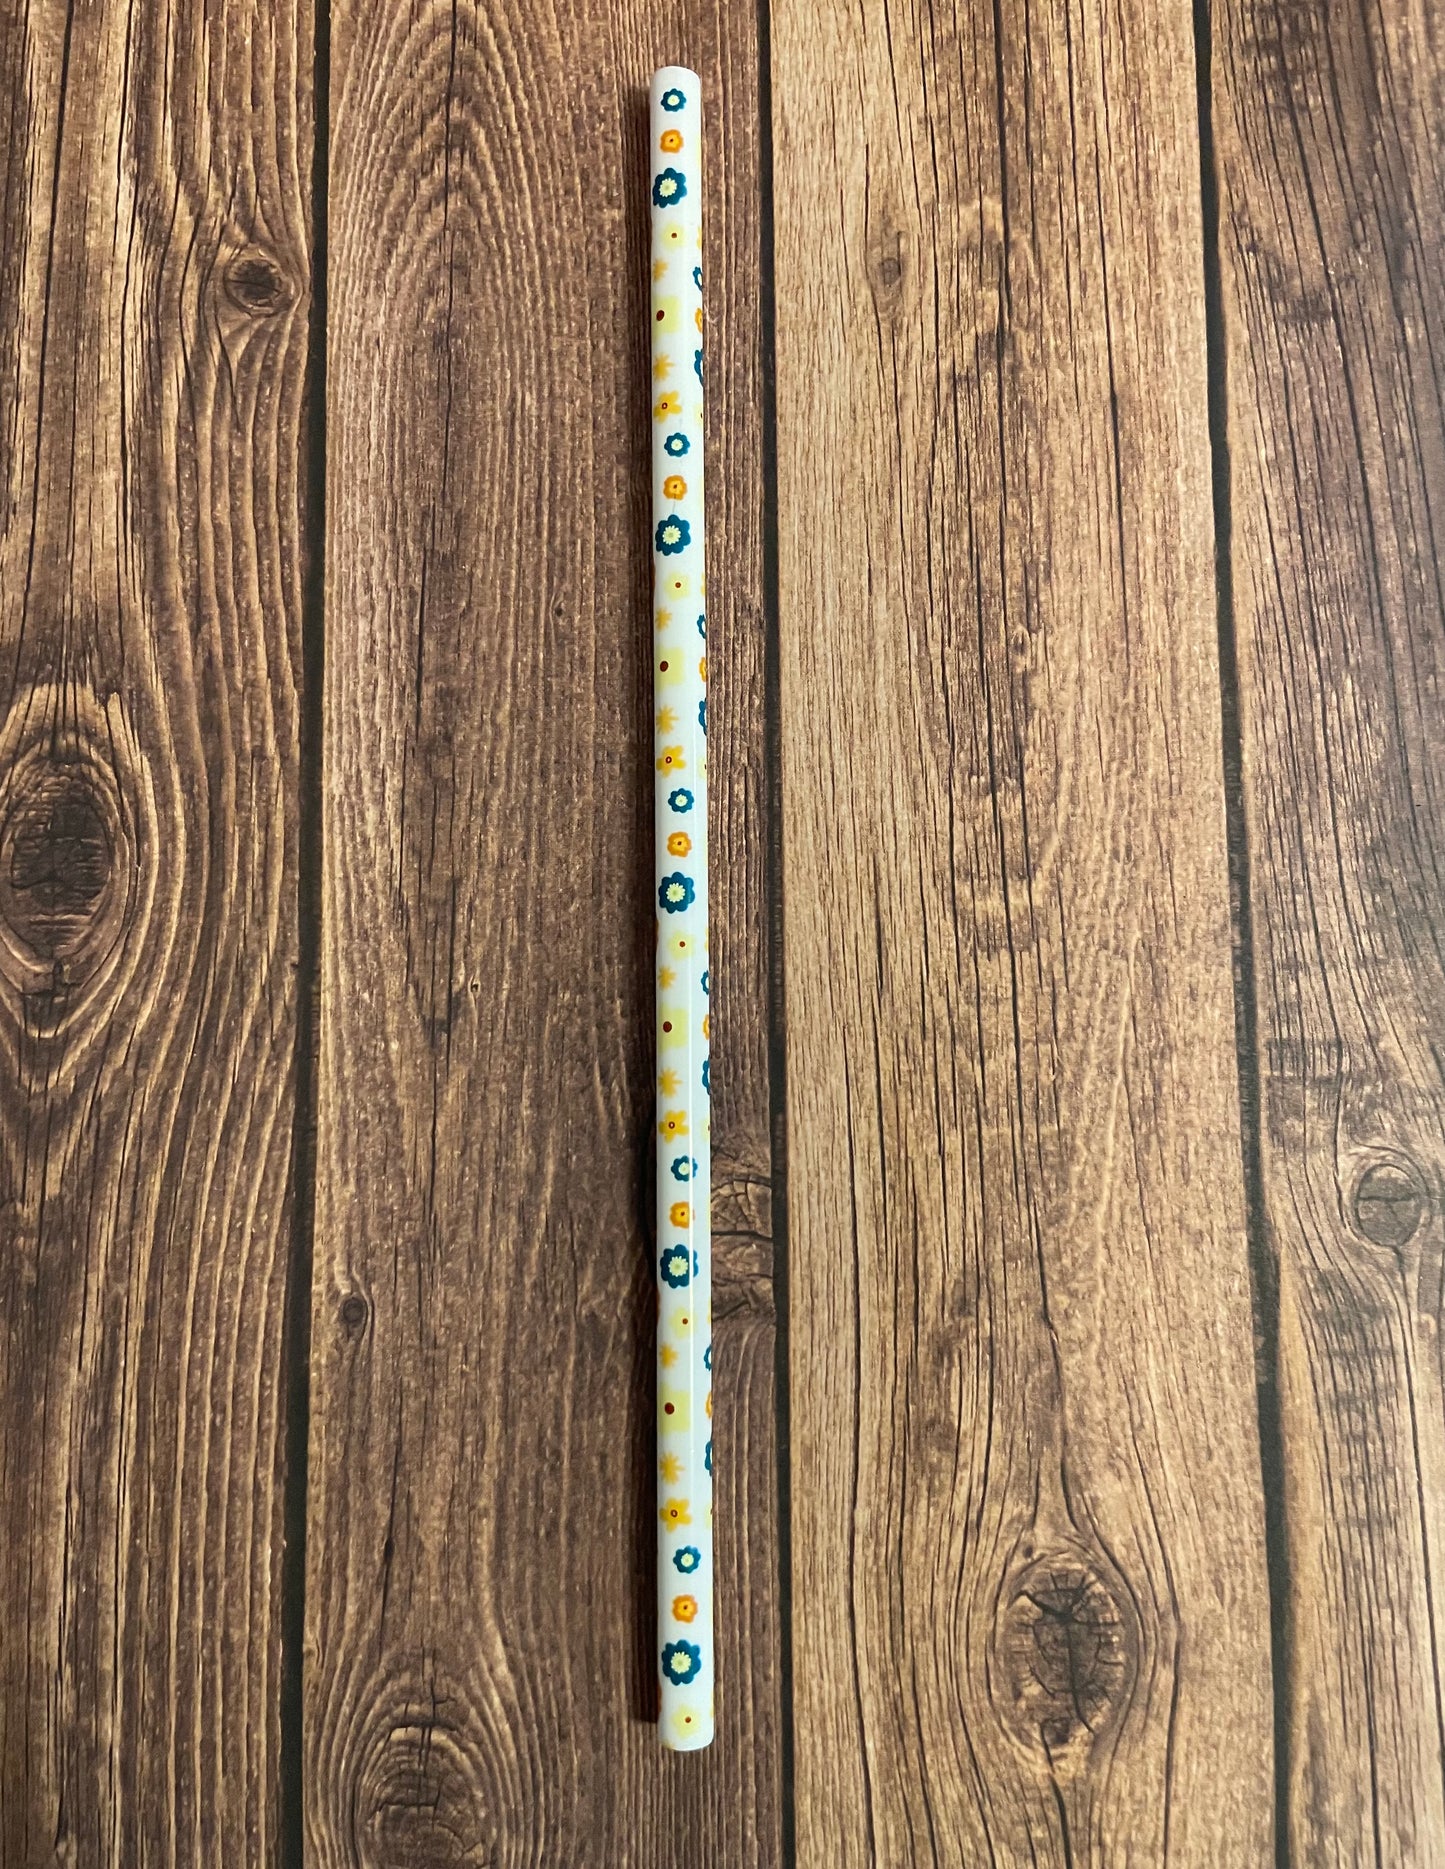 9" Floral plastic reusable straw